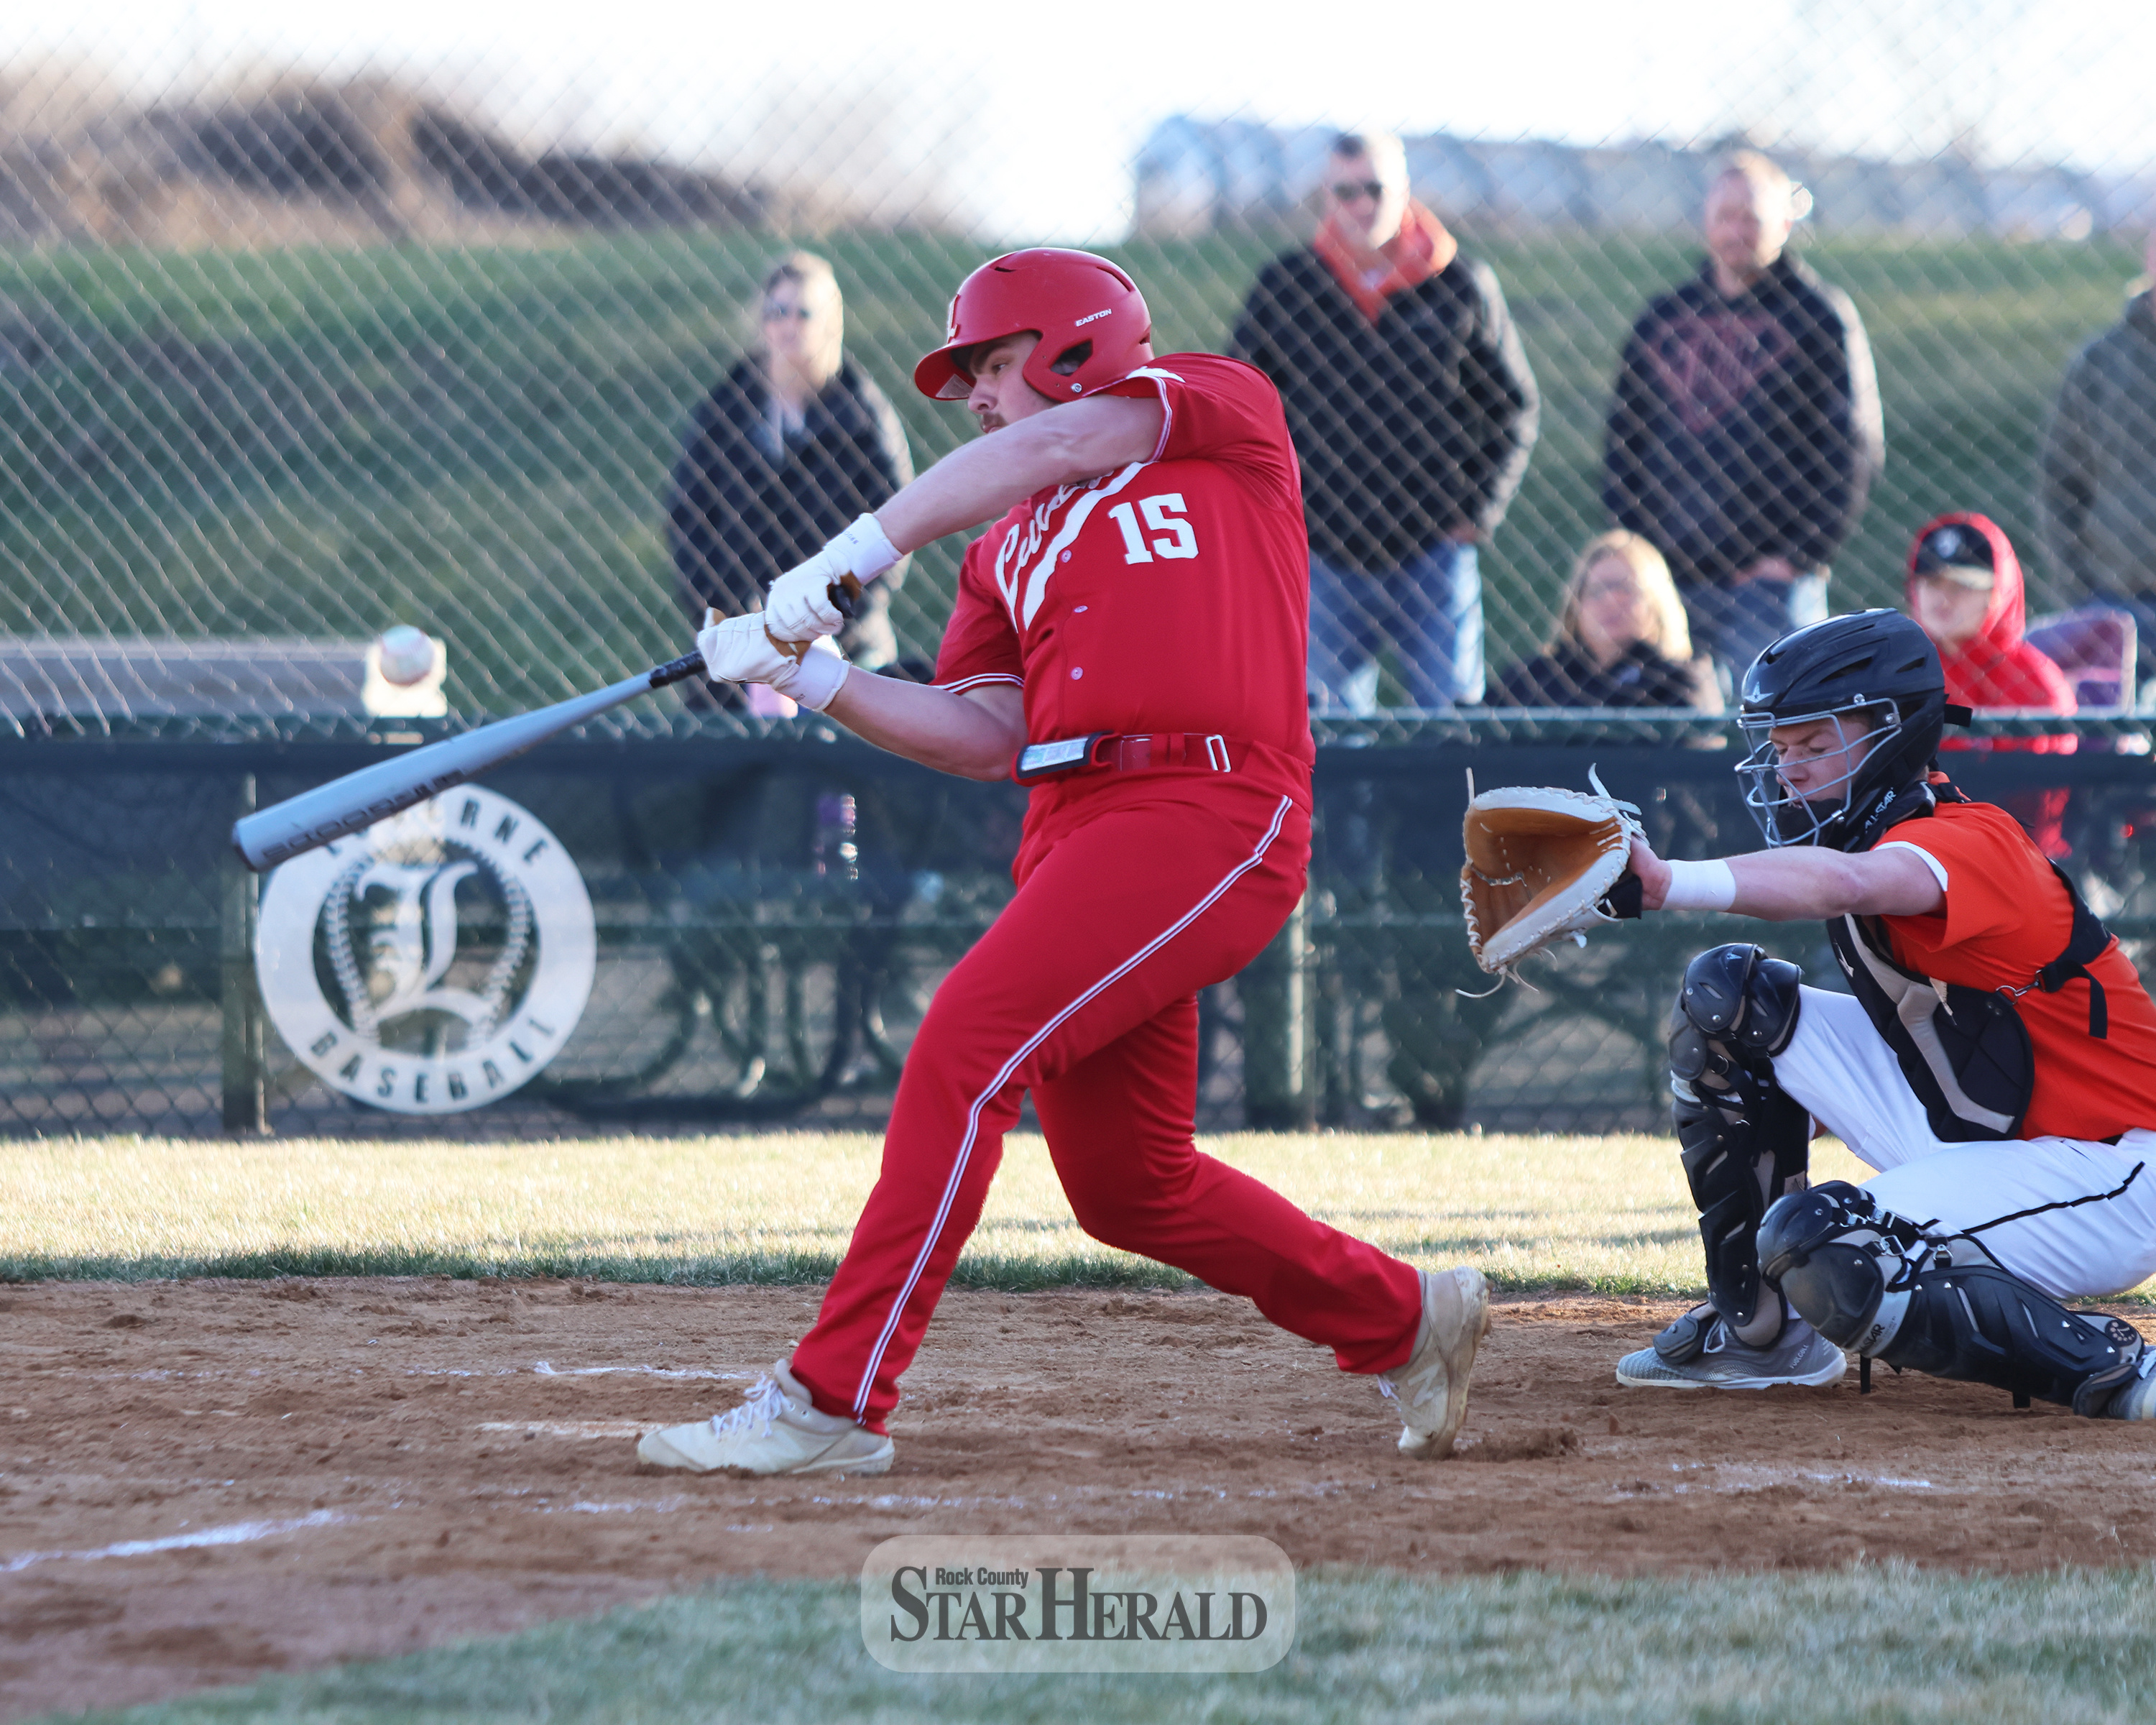 LHS senior Will Serie connects with the ball against Marshall at home Tuesday, April 9. Serie had one hit and two RBIs in the 9-5 loss to the Tigers.